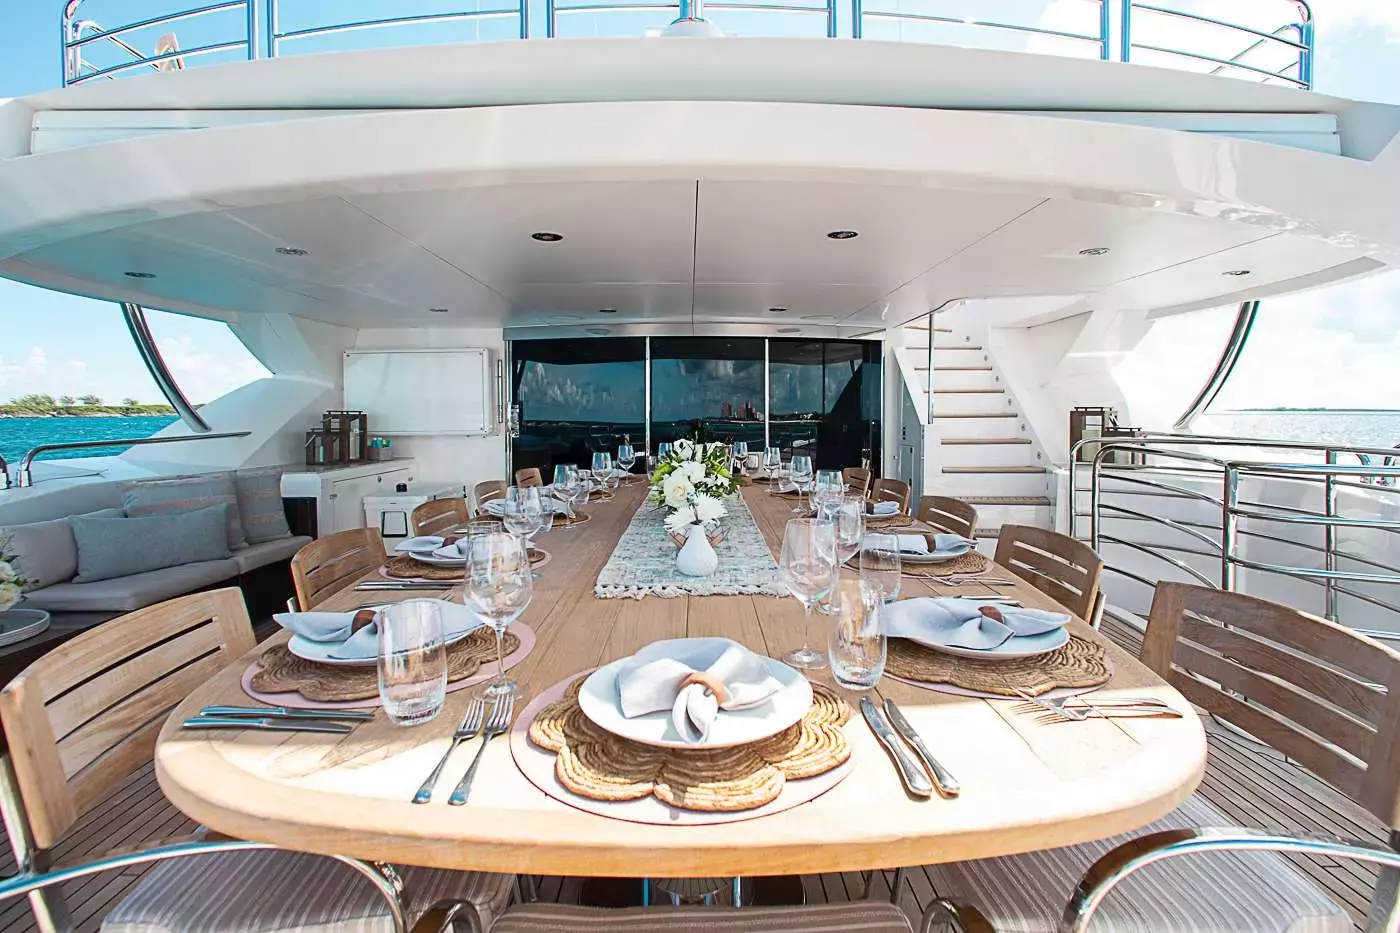 Acacia by Sunseeker - Top rates for a Charter of a private Superyacht in St Martin